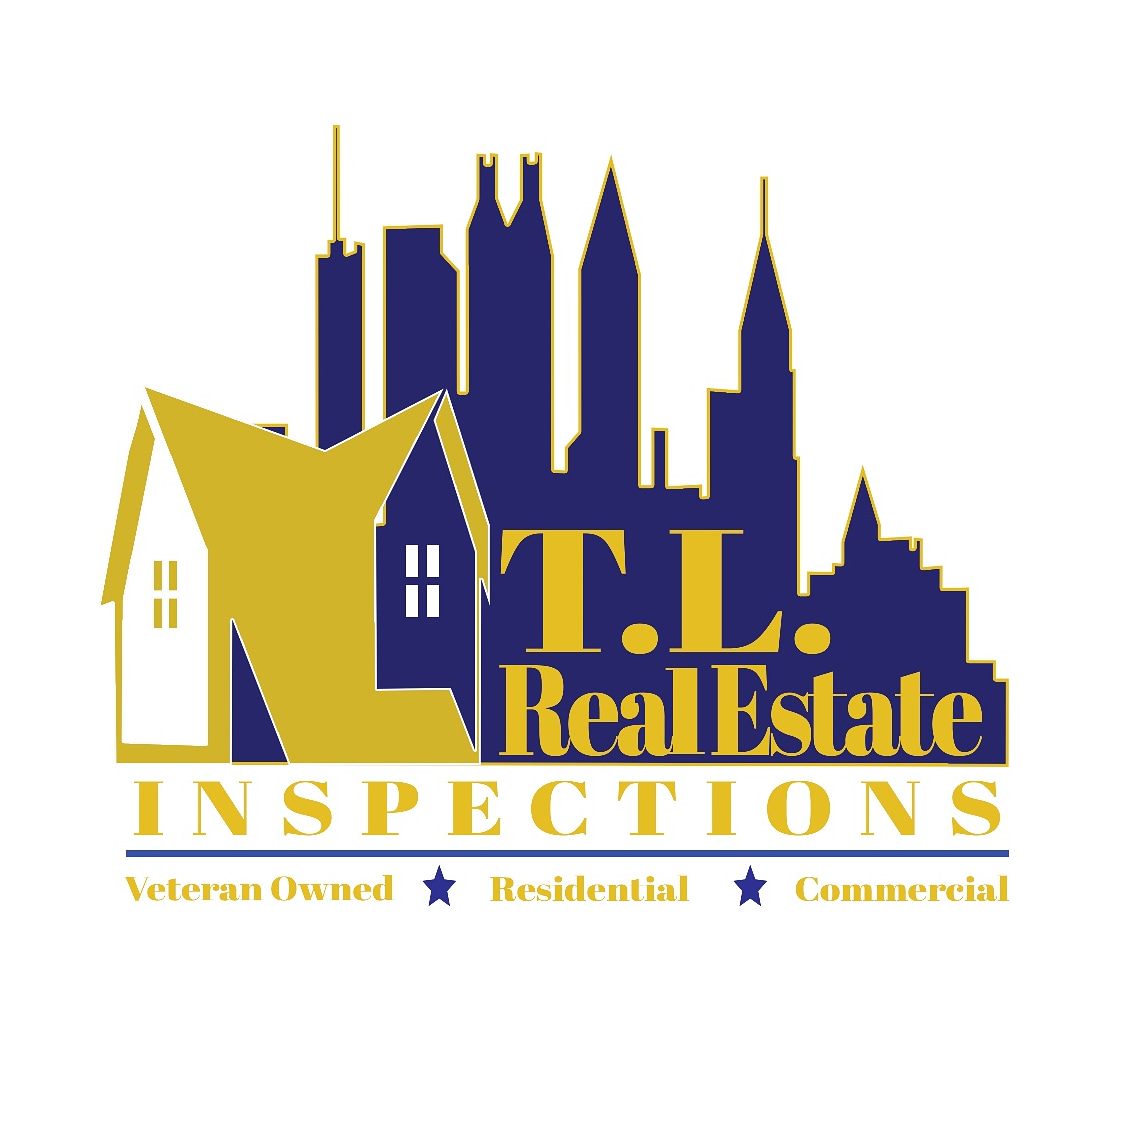 T. L. Real Estate Inspections Logo